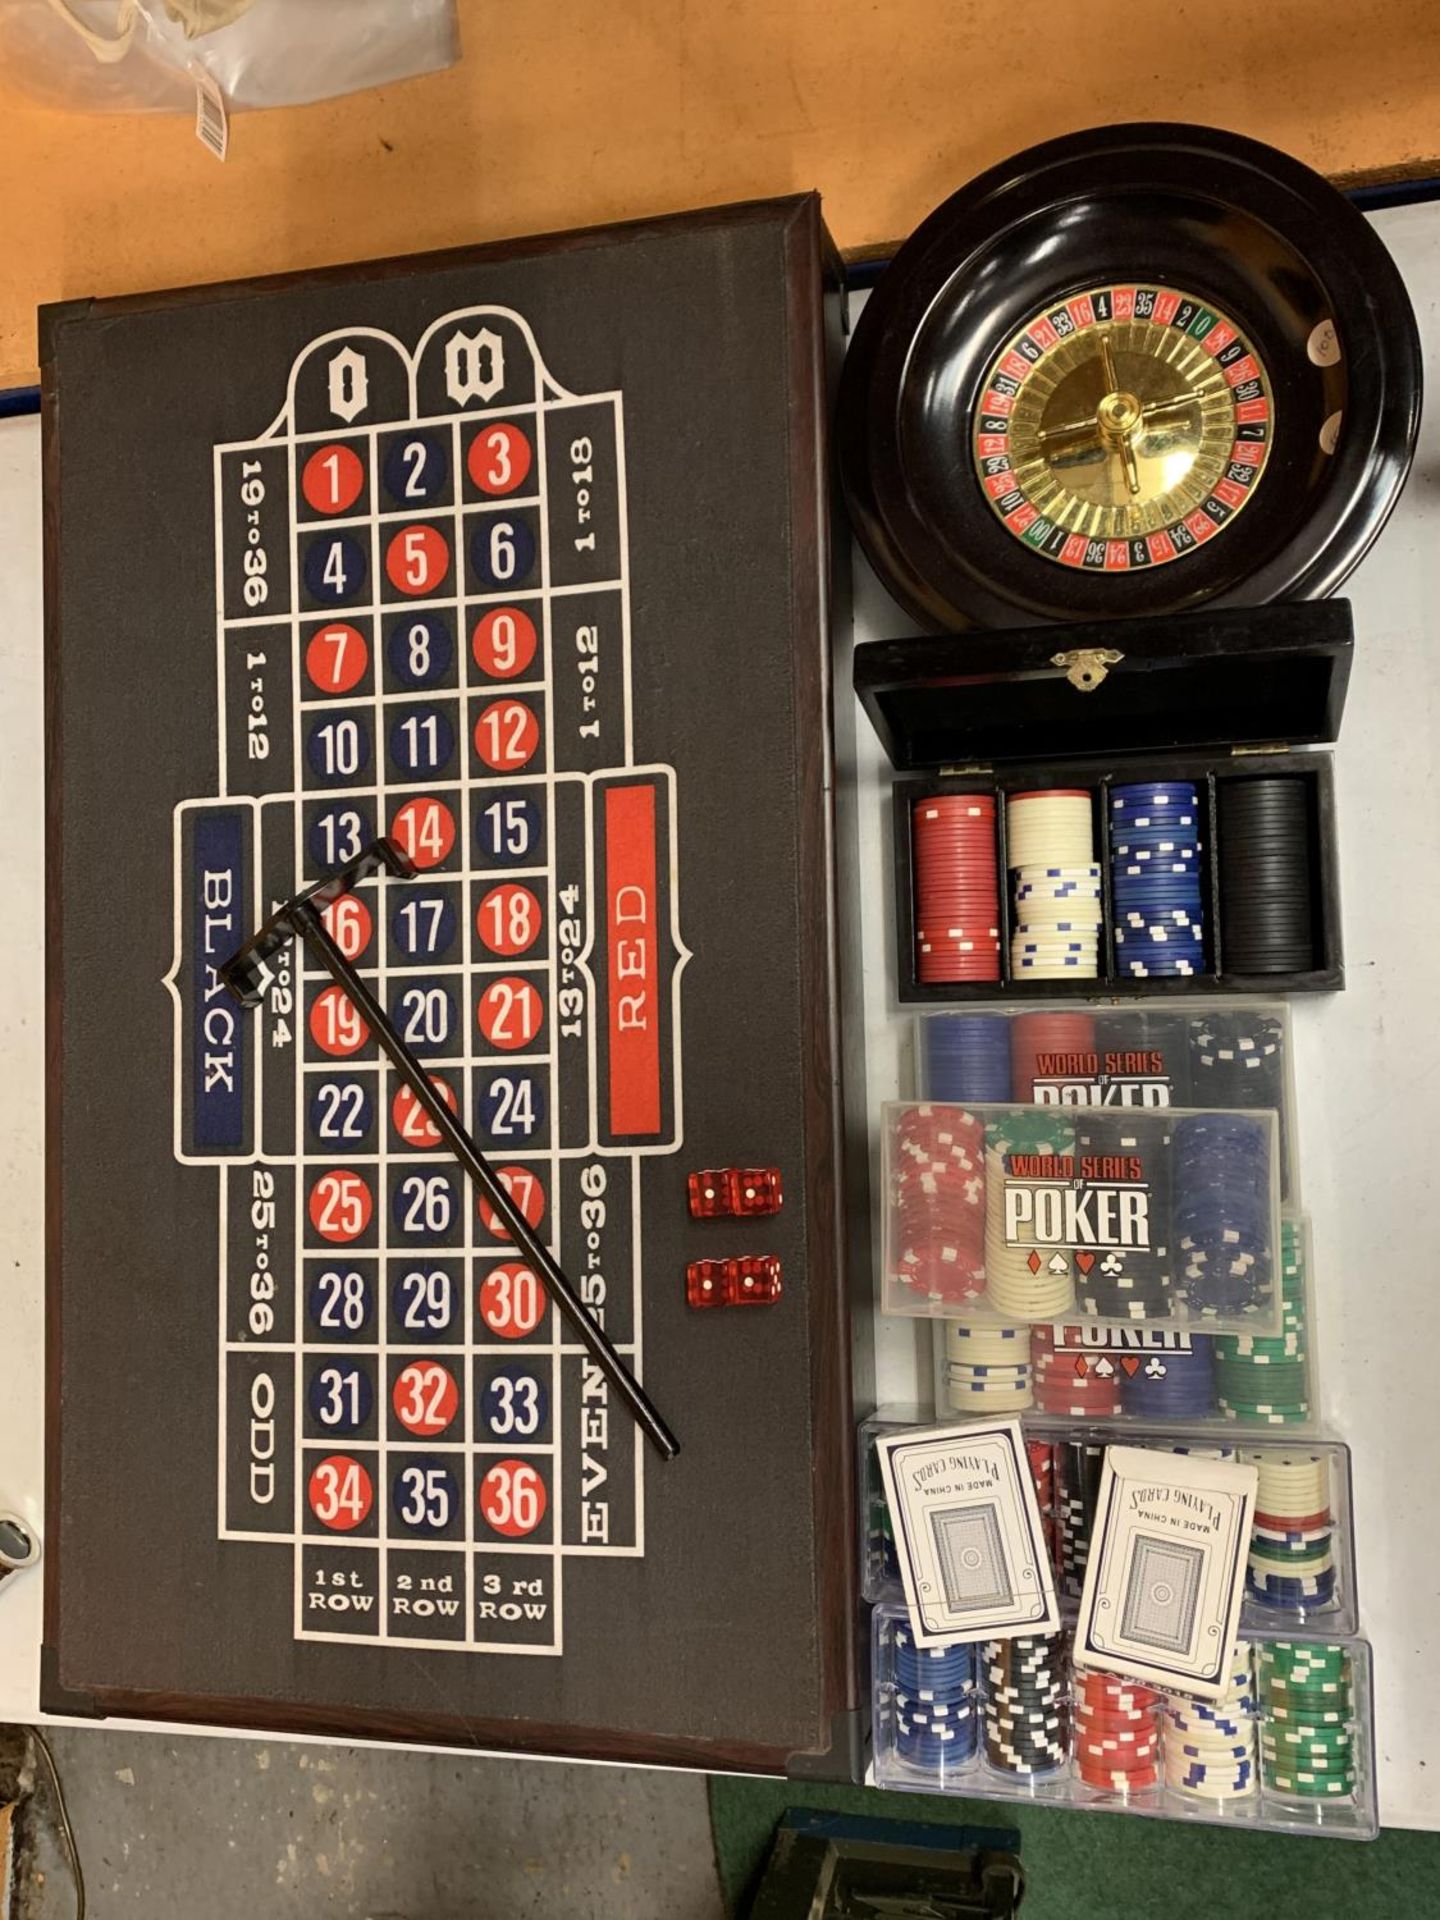 A ROULETTE BOARD WITH WHEEL, CHIPS, DICE ETC